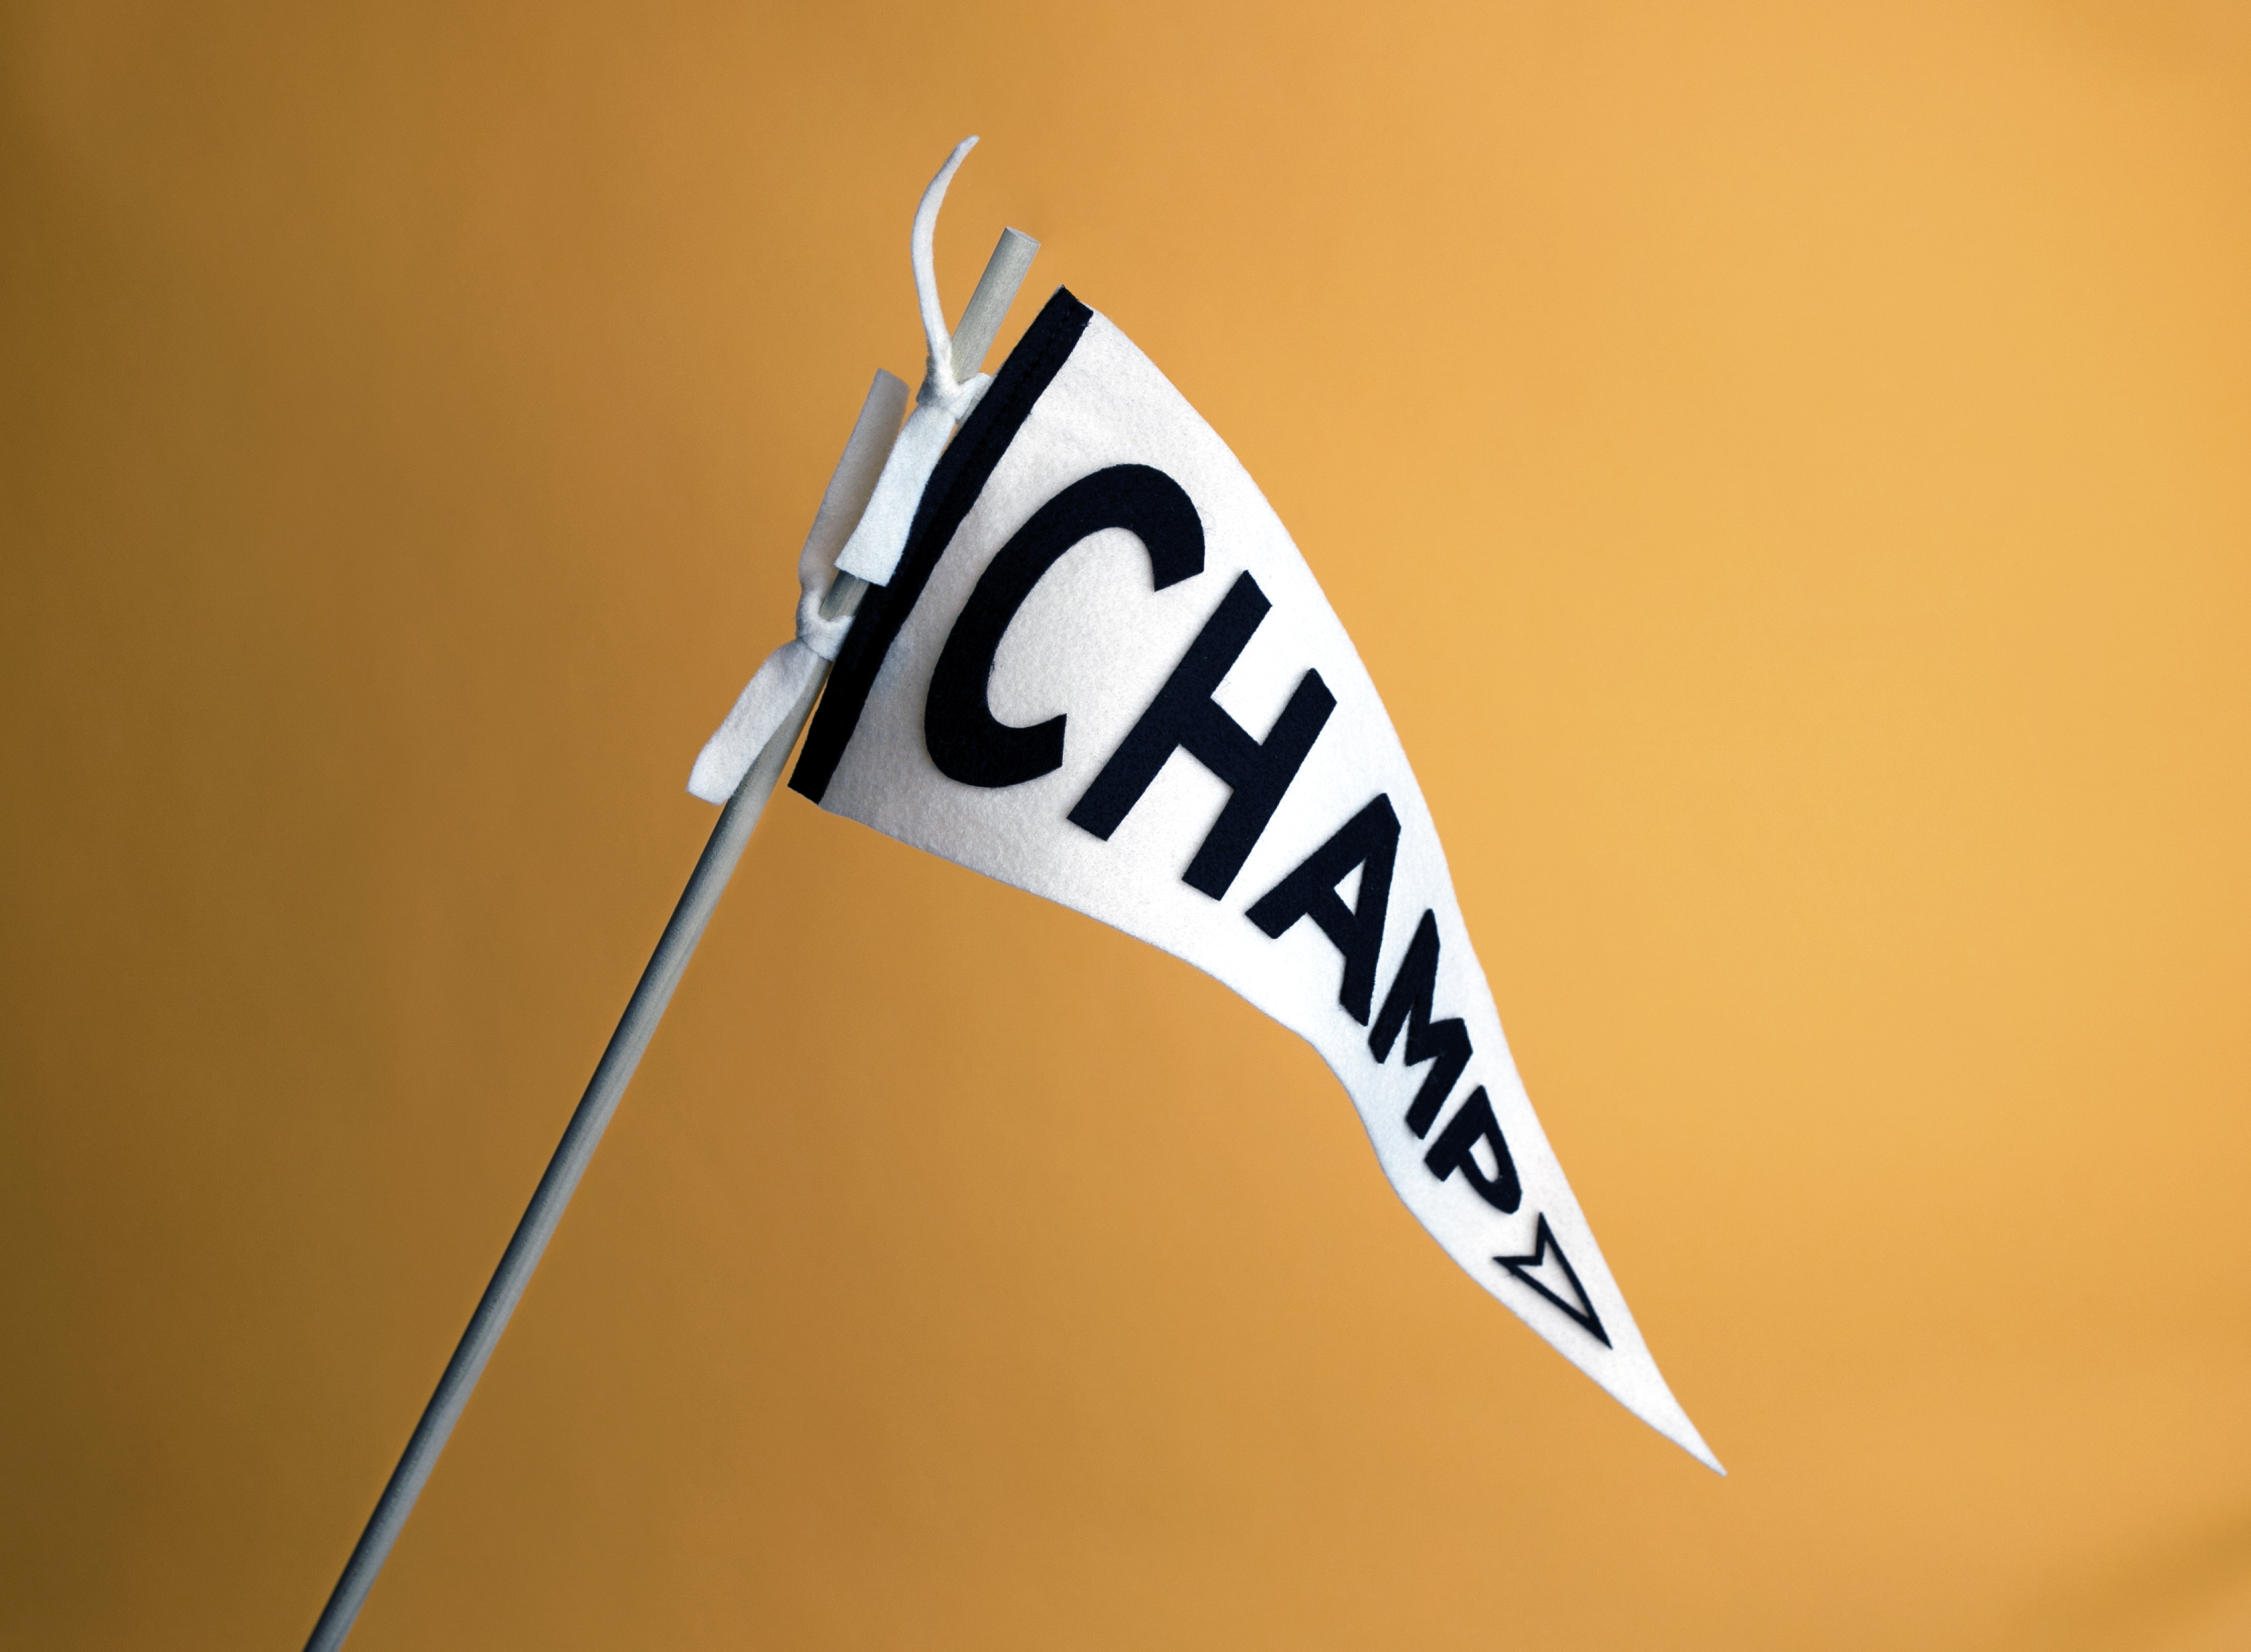 A triangular flag with "Champ" spelled on it